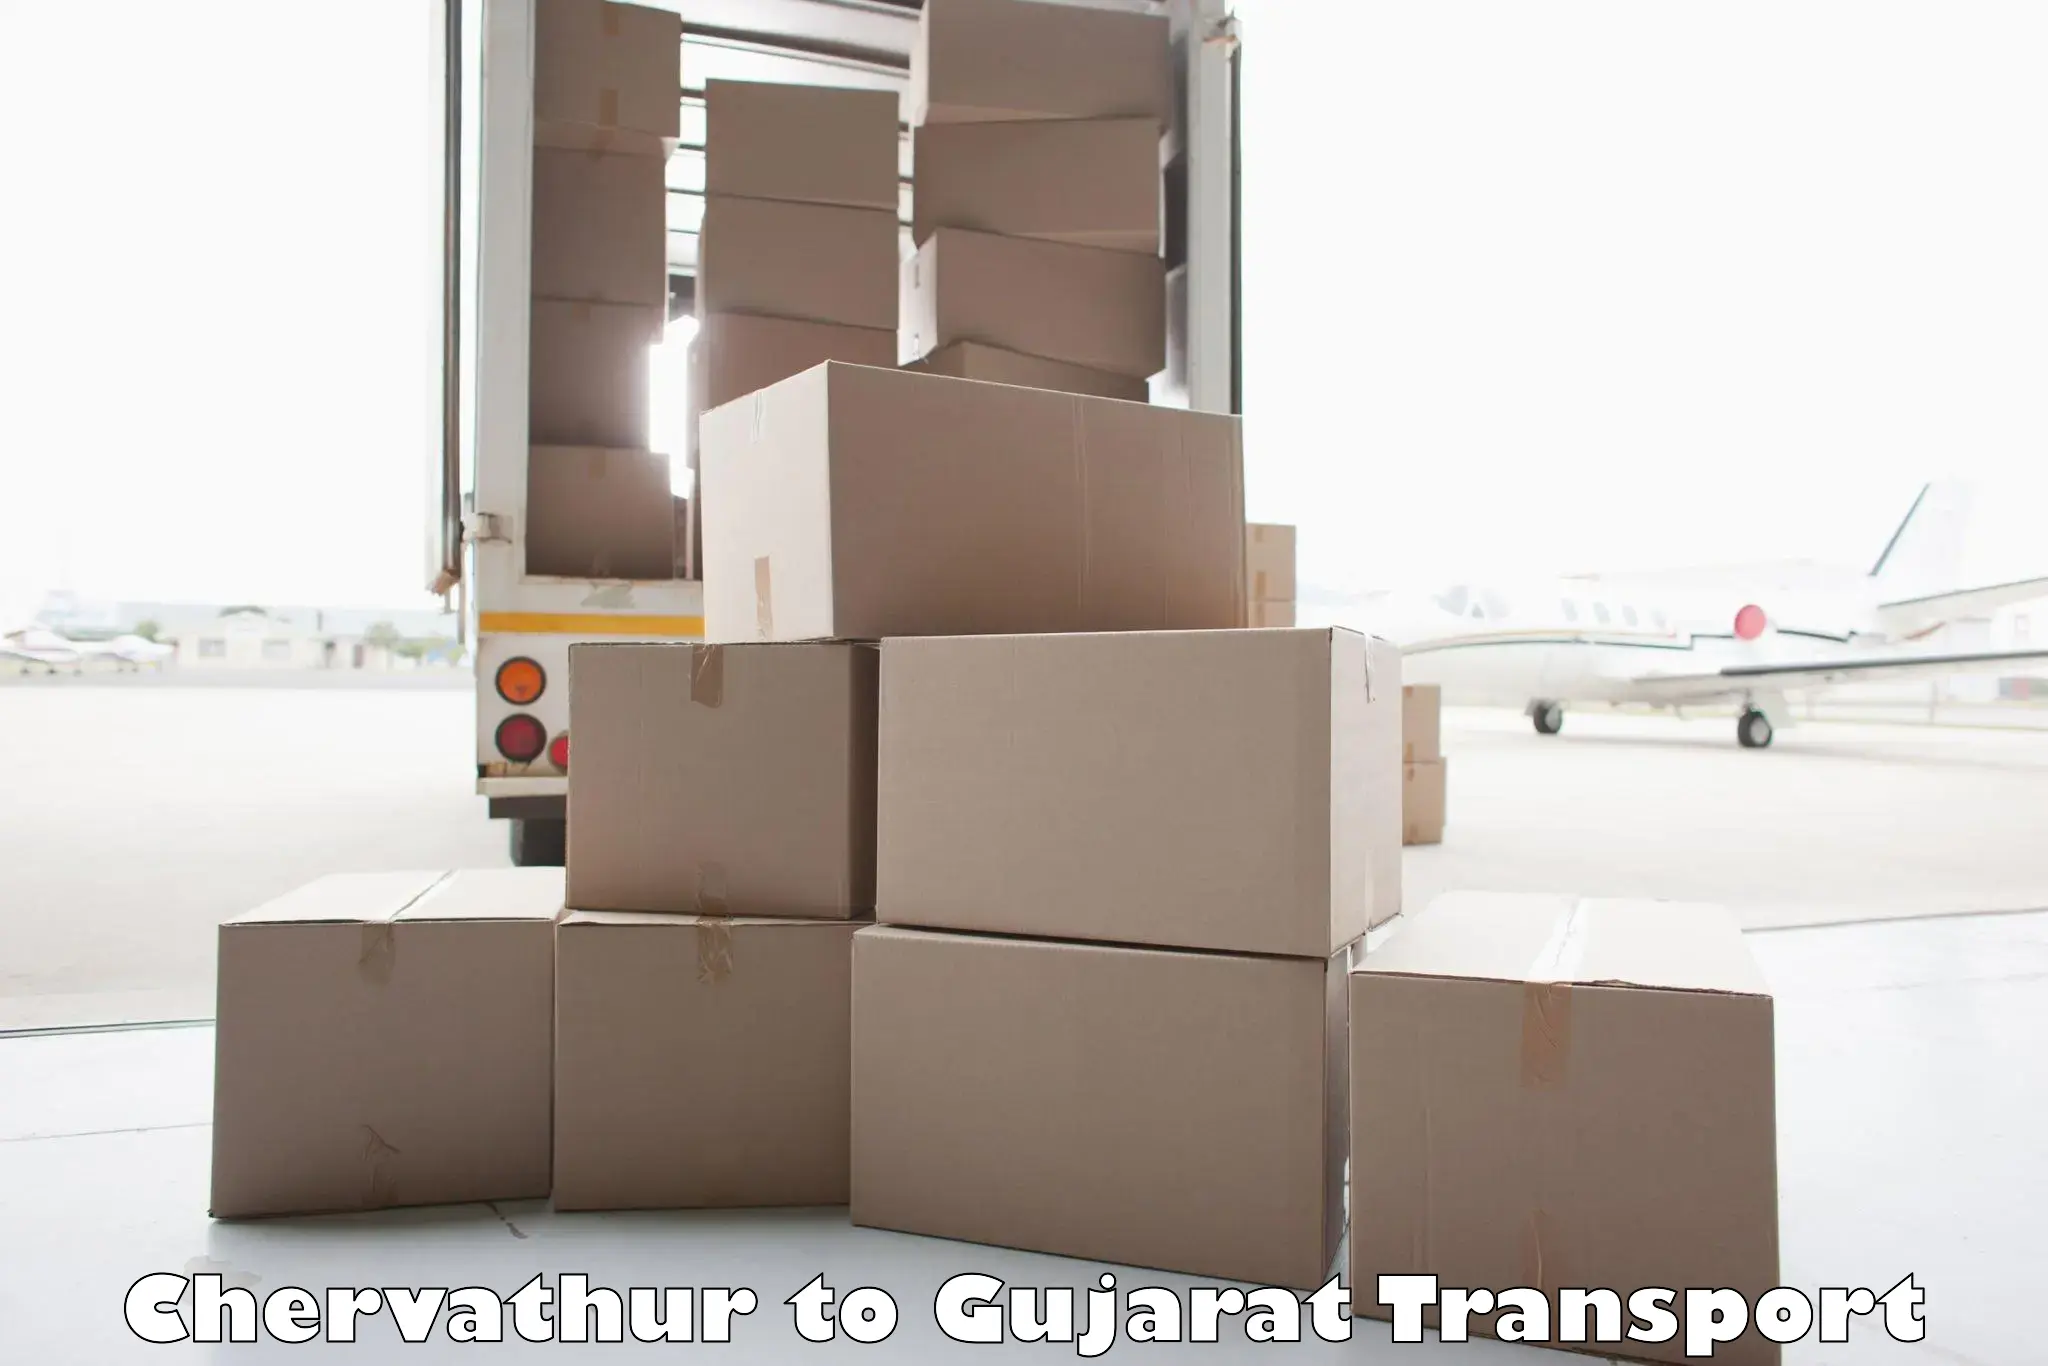 Transport bike from one state to another Chervathur to Patan Gujarat